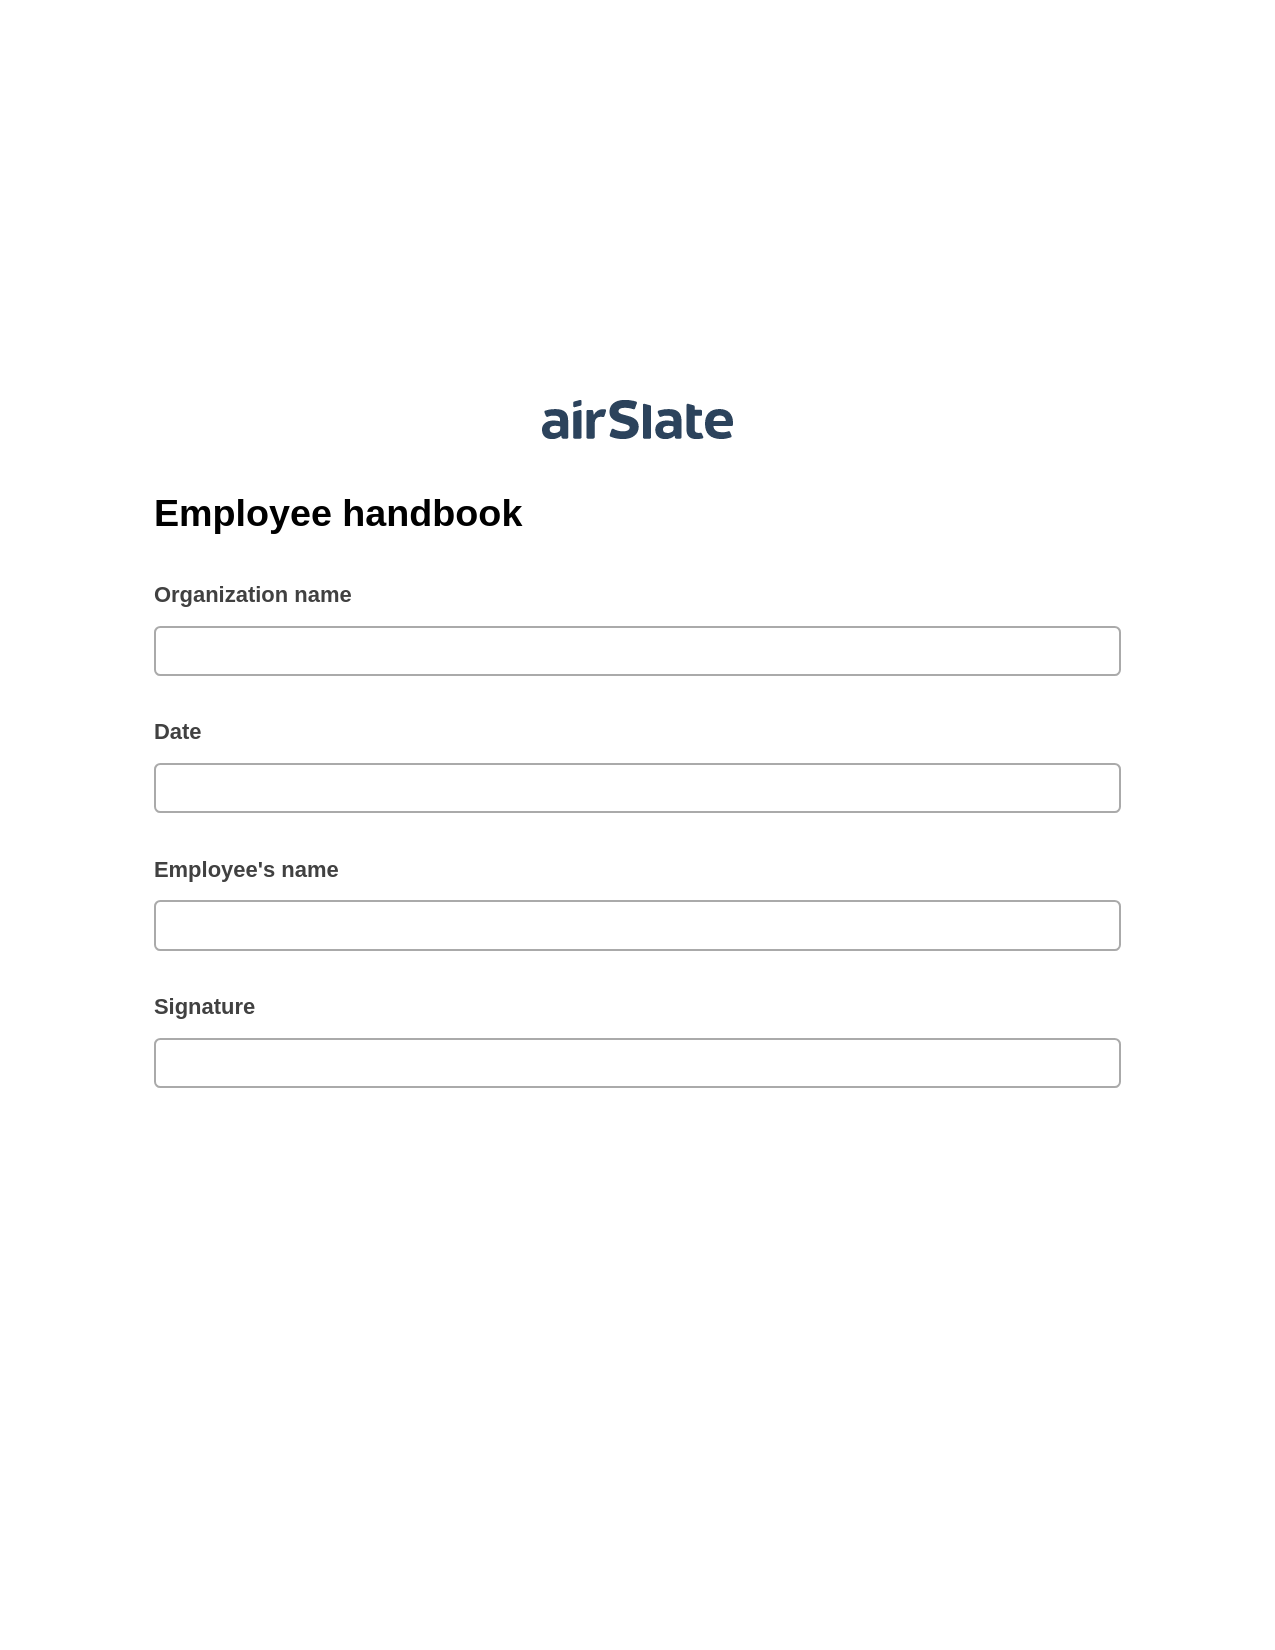 Employee handbook Pre-fill from Litmos bot, Unassign Role Bot, Export to Formstack Documents Bot